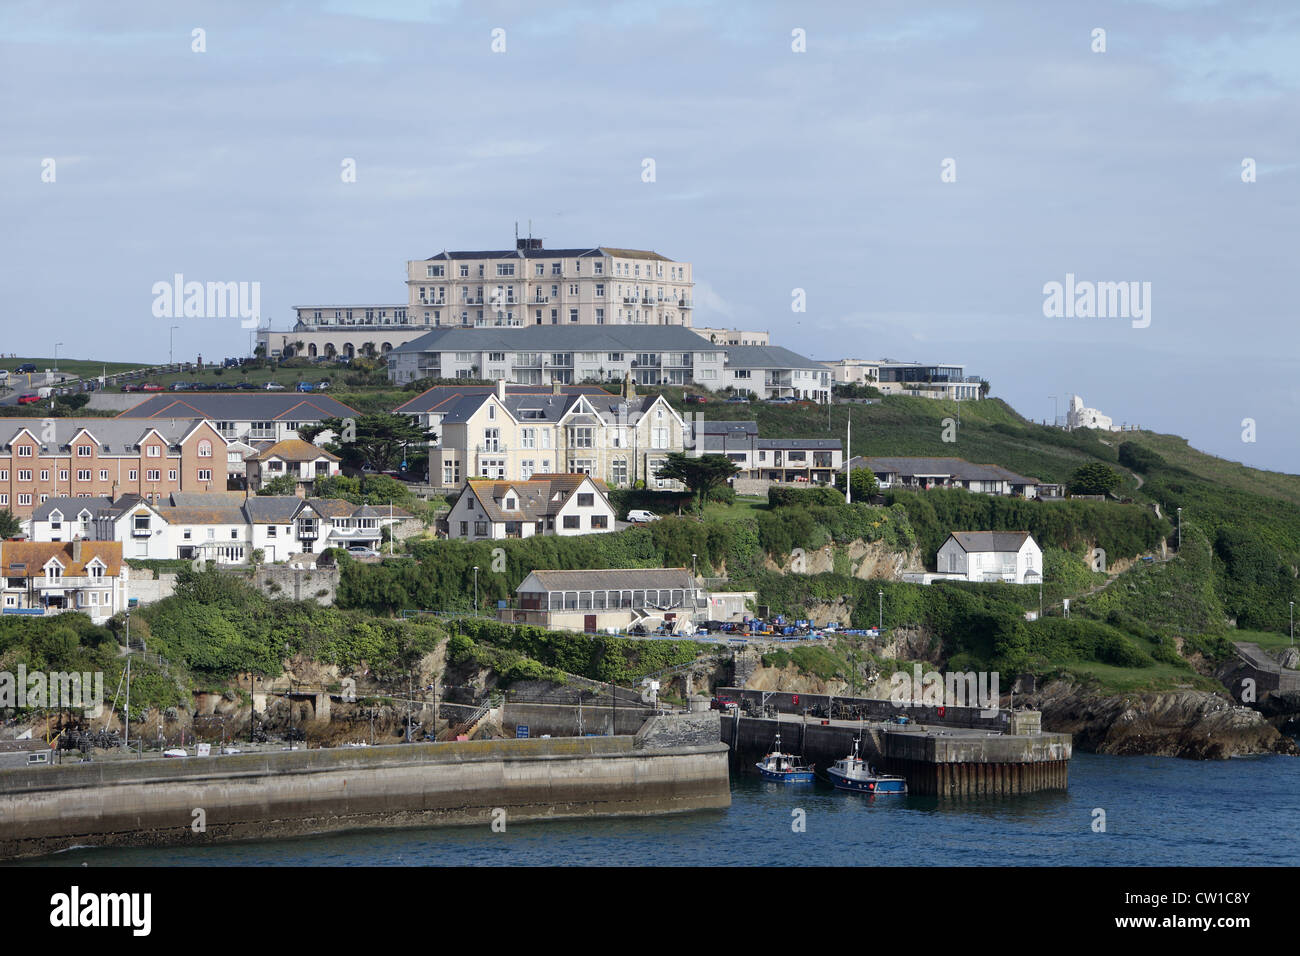 A view of Newquay Harbour in Cornwall, England Stock Photo